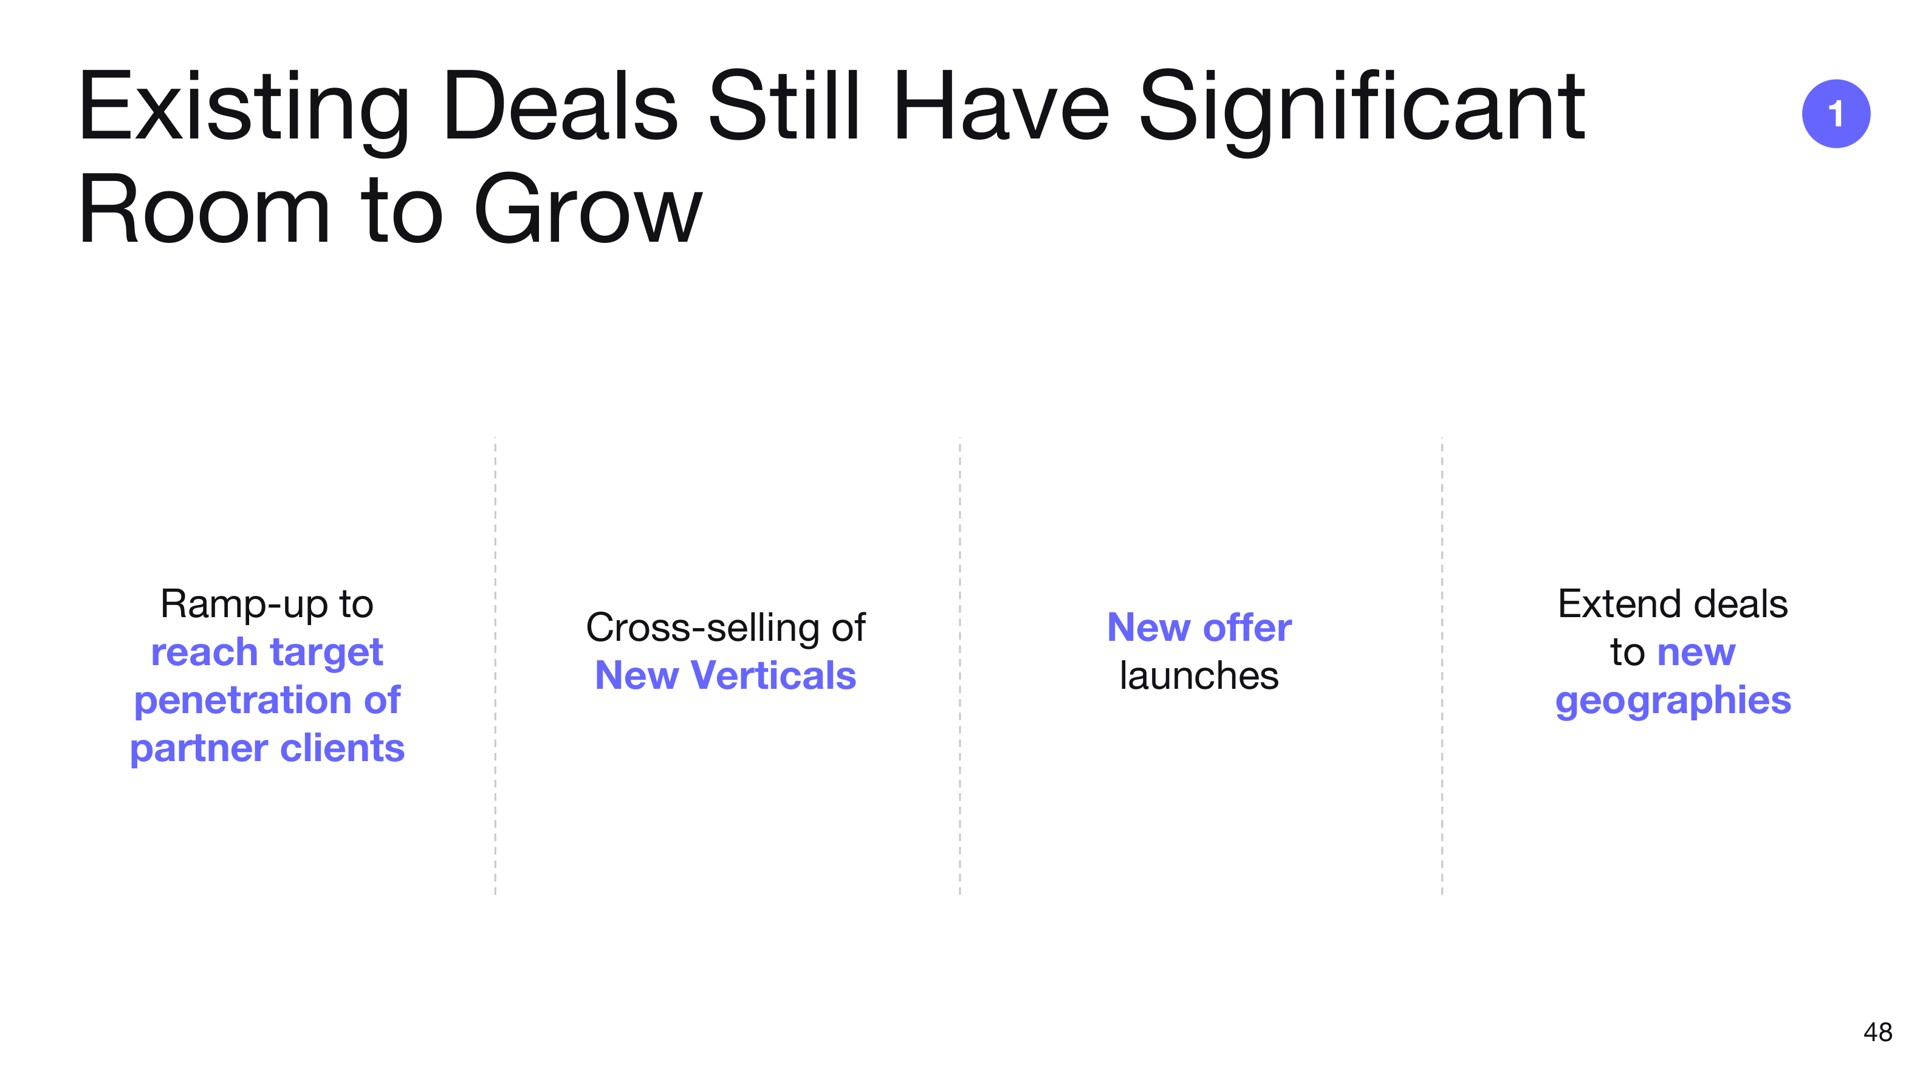 existing deals still have significant room to grow | Deezer